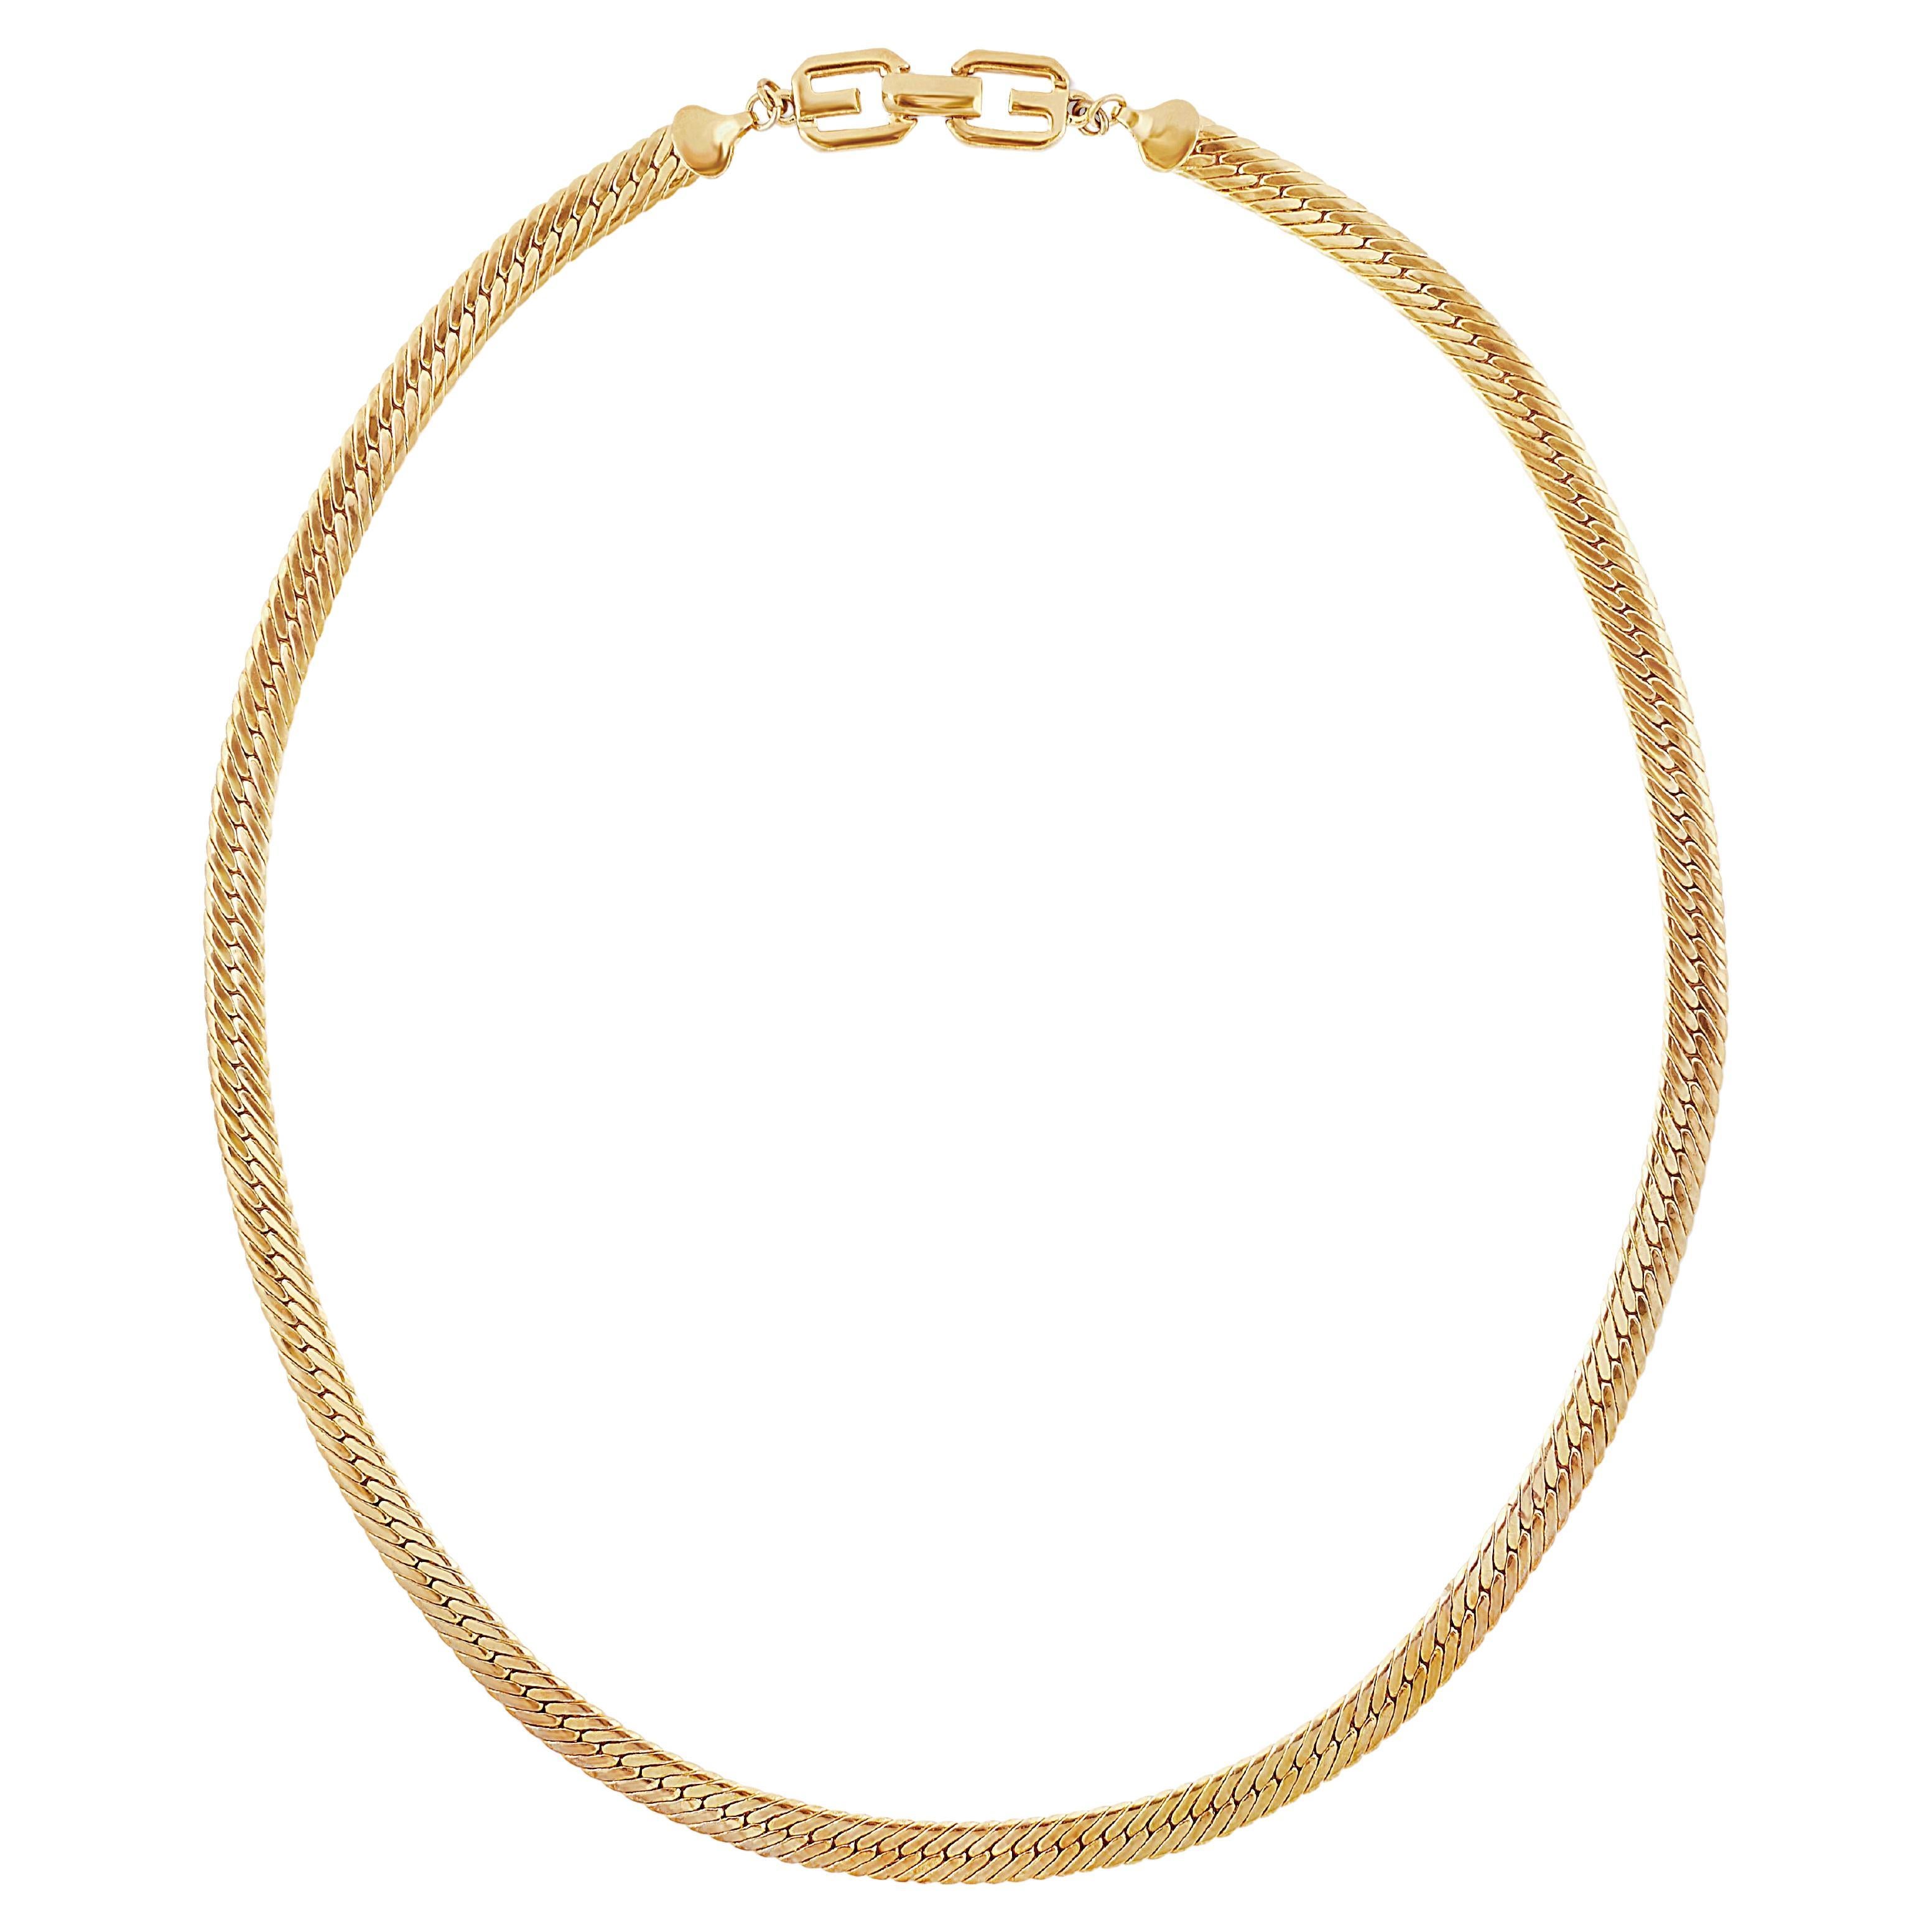 Vintage Givenchy Long Herringbone Chain Necklace with Logo Clasp, 1980s For Sale